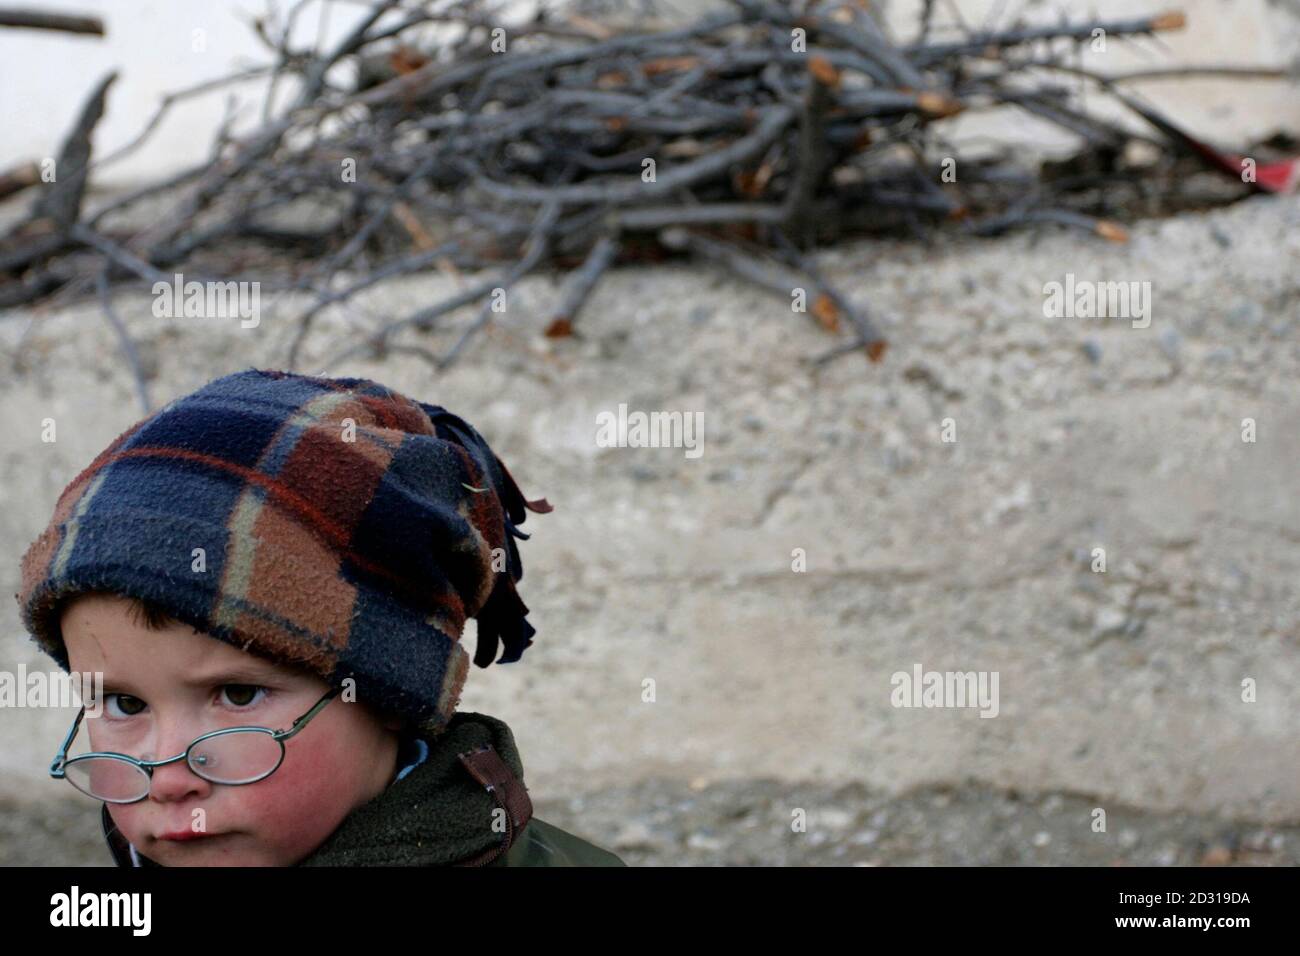 An ethnic Gorani child stands in the village of Brod in the Sharr mountain region of southern Kosovo February 10, 2008. A slow exodus threatens the existence of the Sharr region's Muslim Slavs, known as Gorani, as Kosovo's ethnic Albanian majority prepares to declare independence from Serbia. The Gorani minority shares the Islamic faith of Kosovo Albanians, but the Slav identity and language of their Serb former rulers. Picture taken February 10, 2008. REUTERS/Matt Robinson (SERBIA) Stock Photo